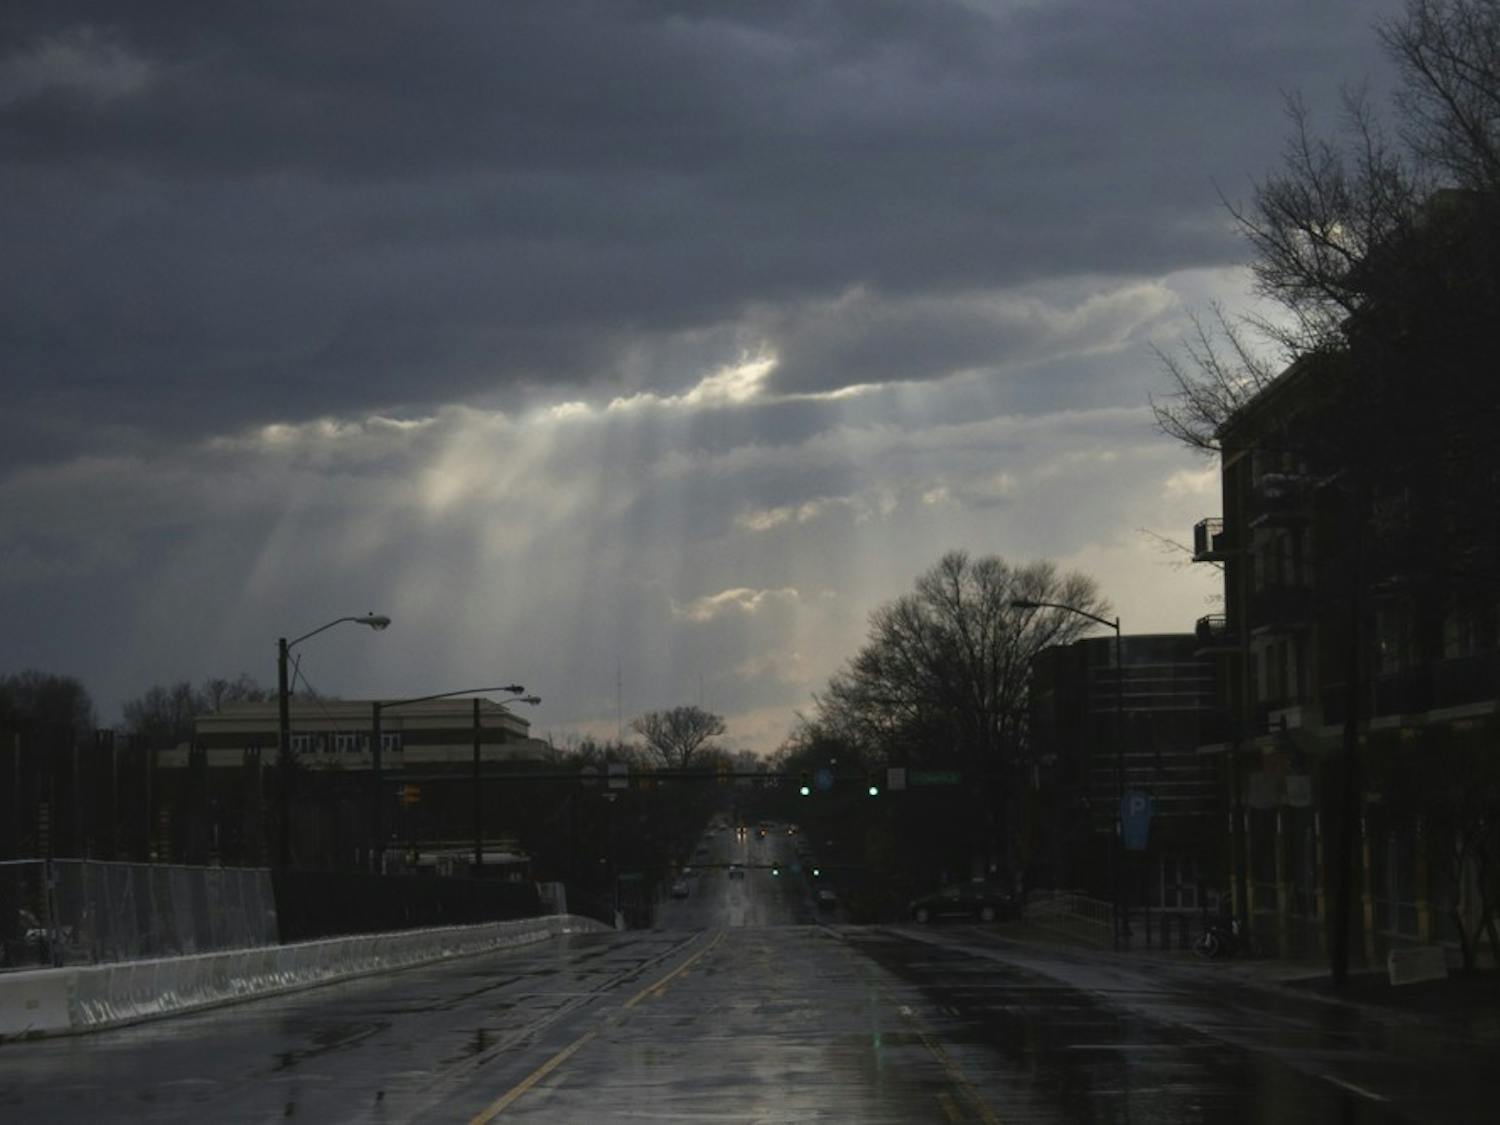 After the storm cleared, sunlight peaked through the clouds on Franklin Street Wednesday afternoon.